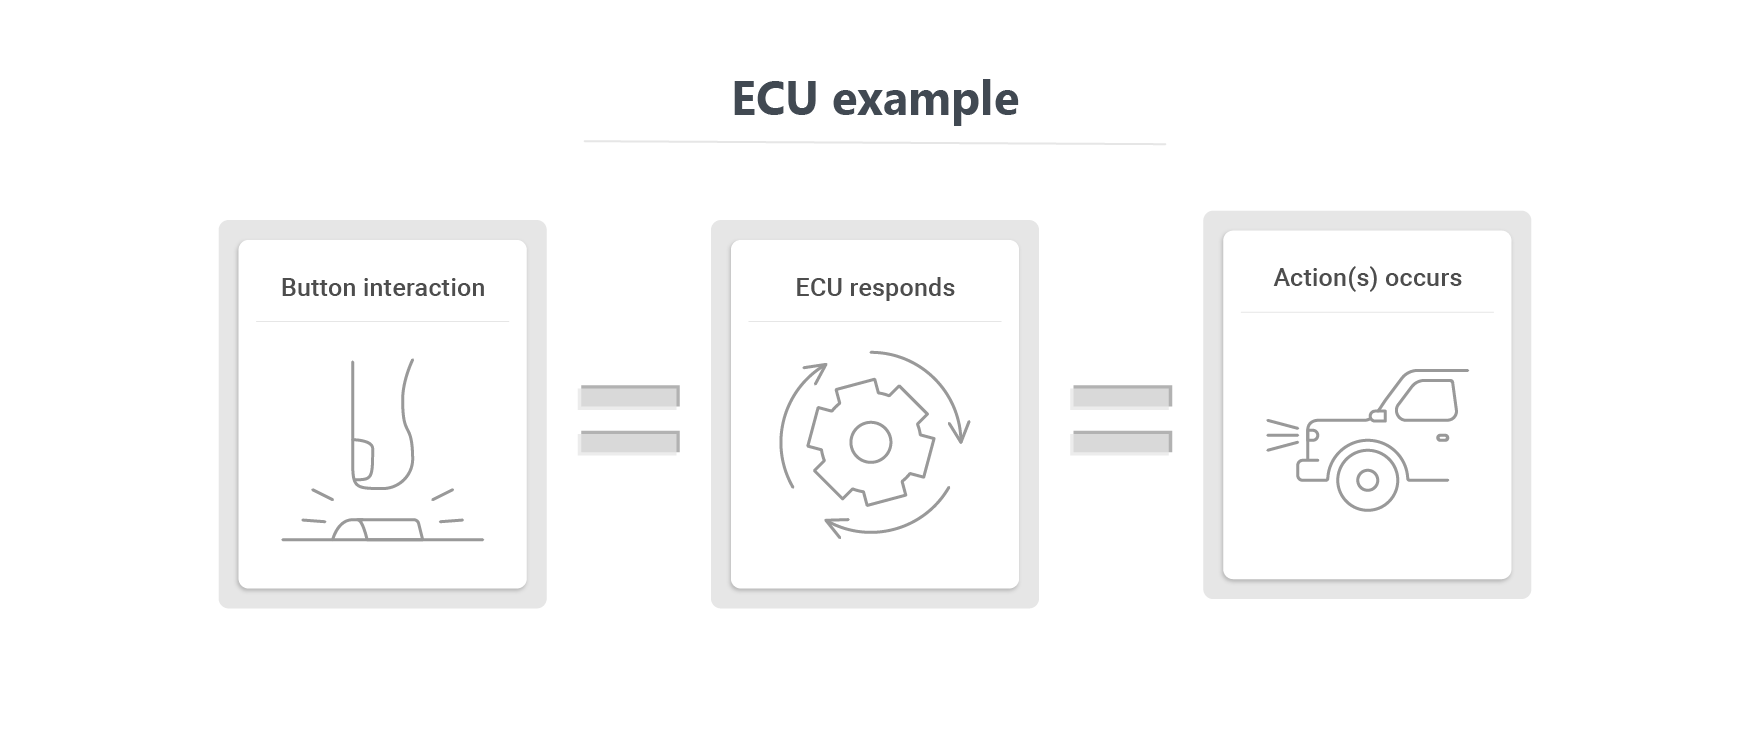 Example of how ECU works in a car